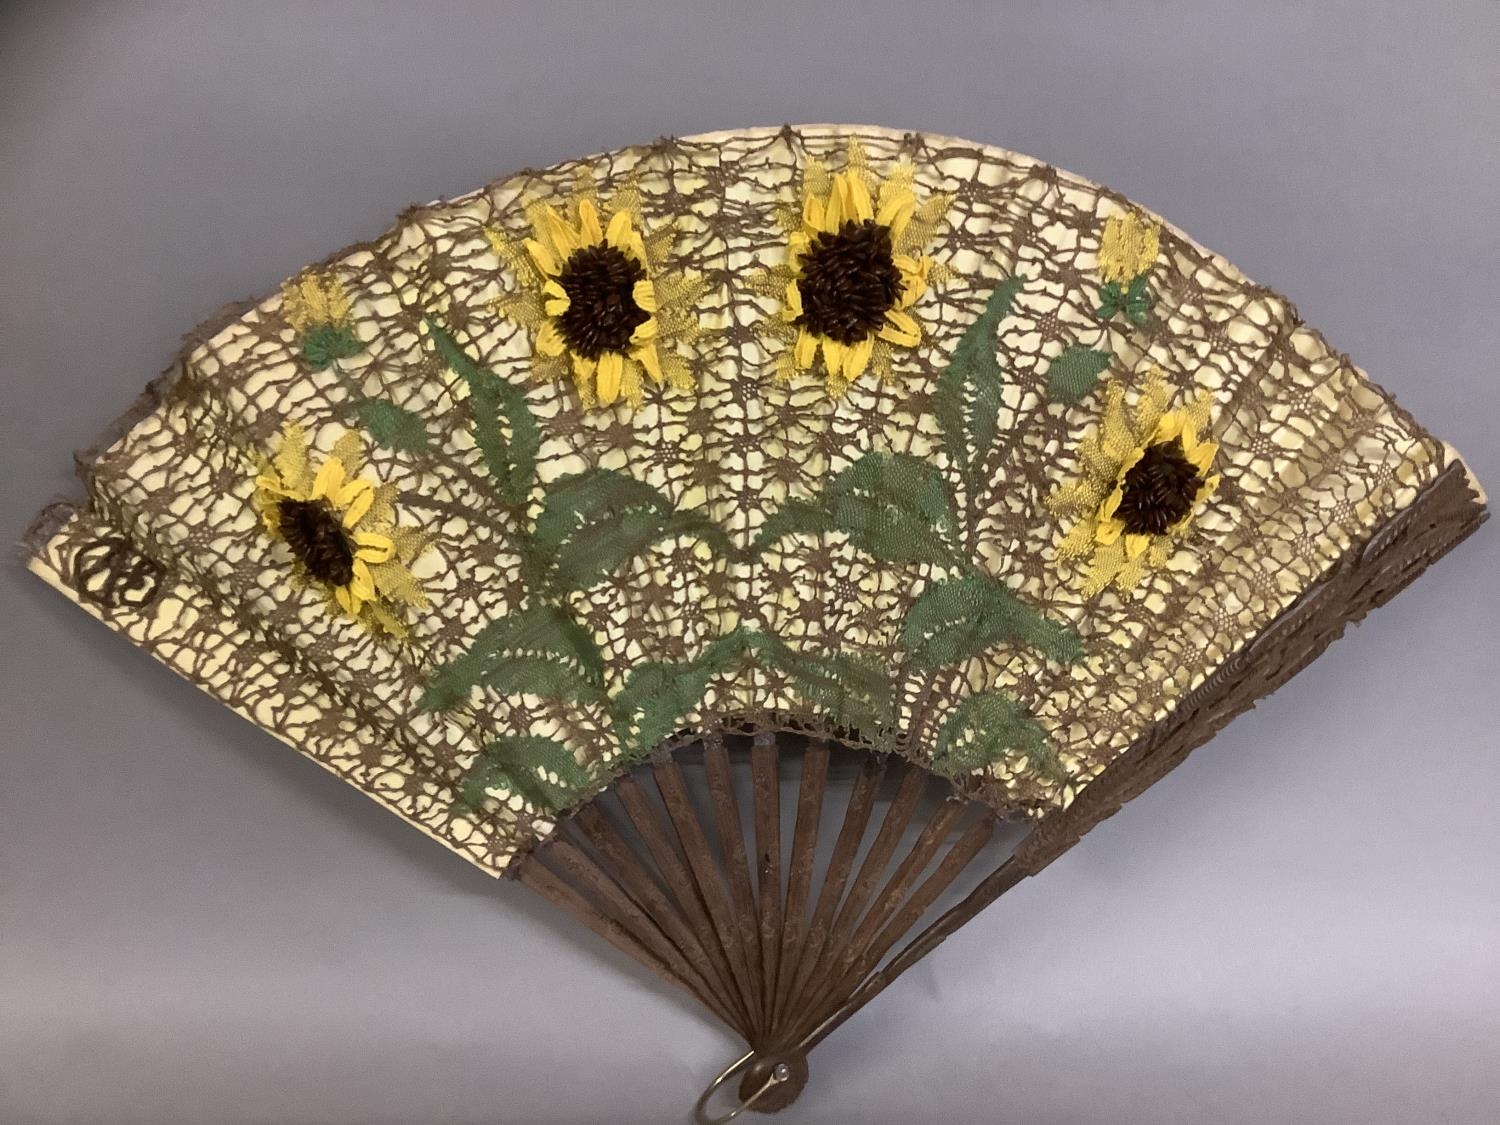 Ann Collier: Sunflowers, a large lace fan mounted on late 19th century carved and pierced wood